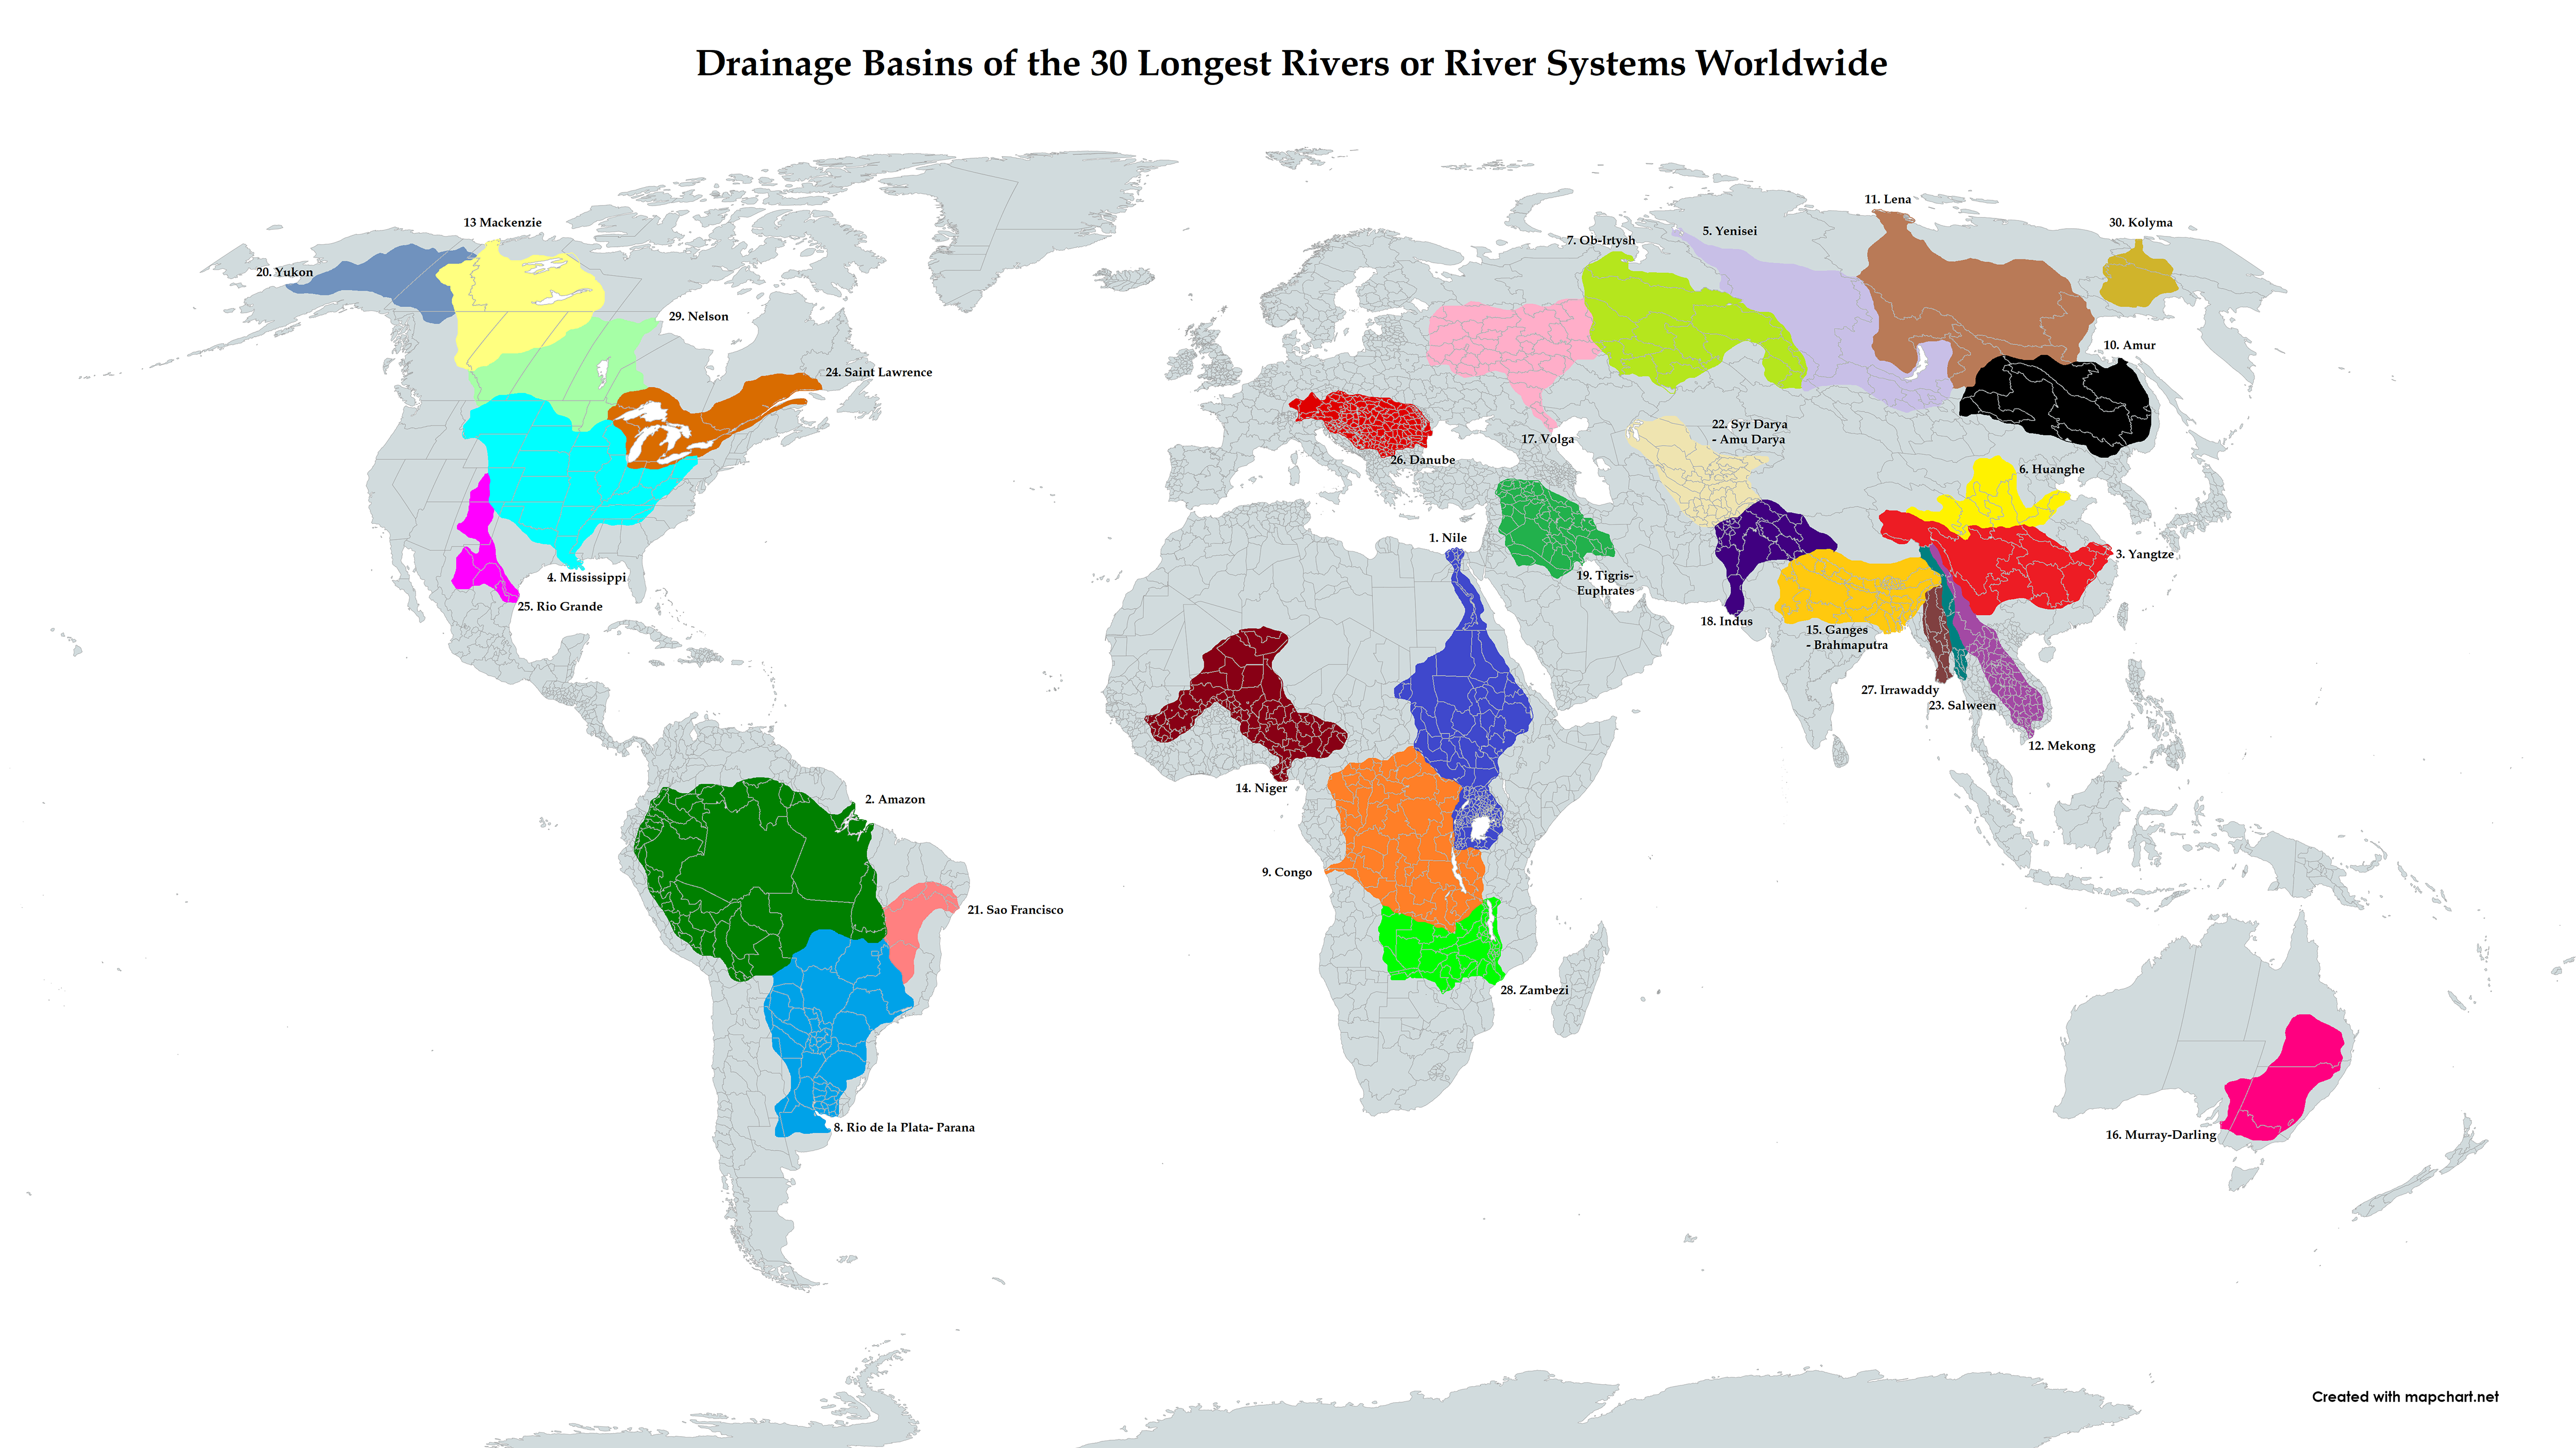 Mapped: The Drainage Basins of the World's Longest Rivers